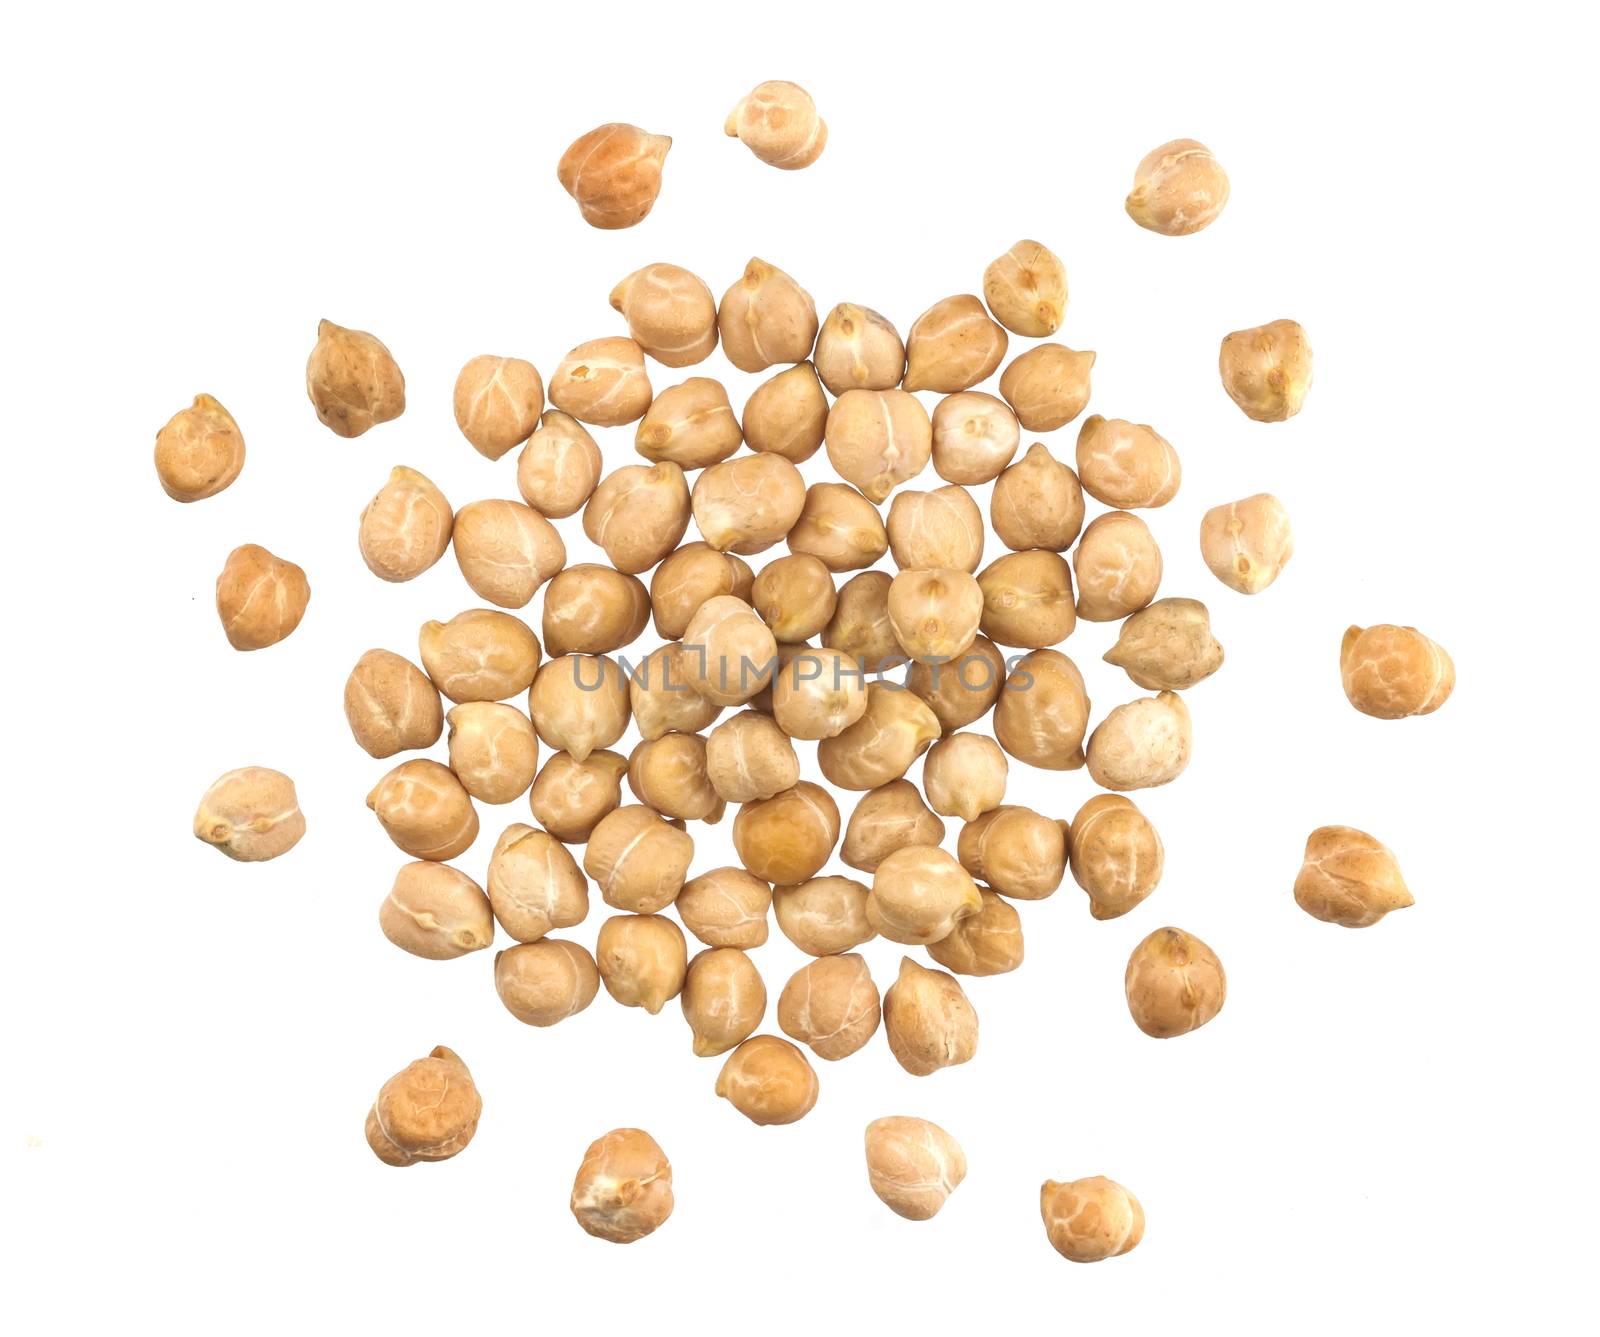 Heap of chickpeas isolated on white background, top view by xamtiw